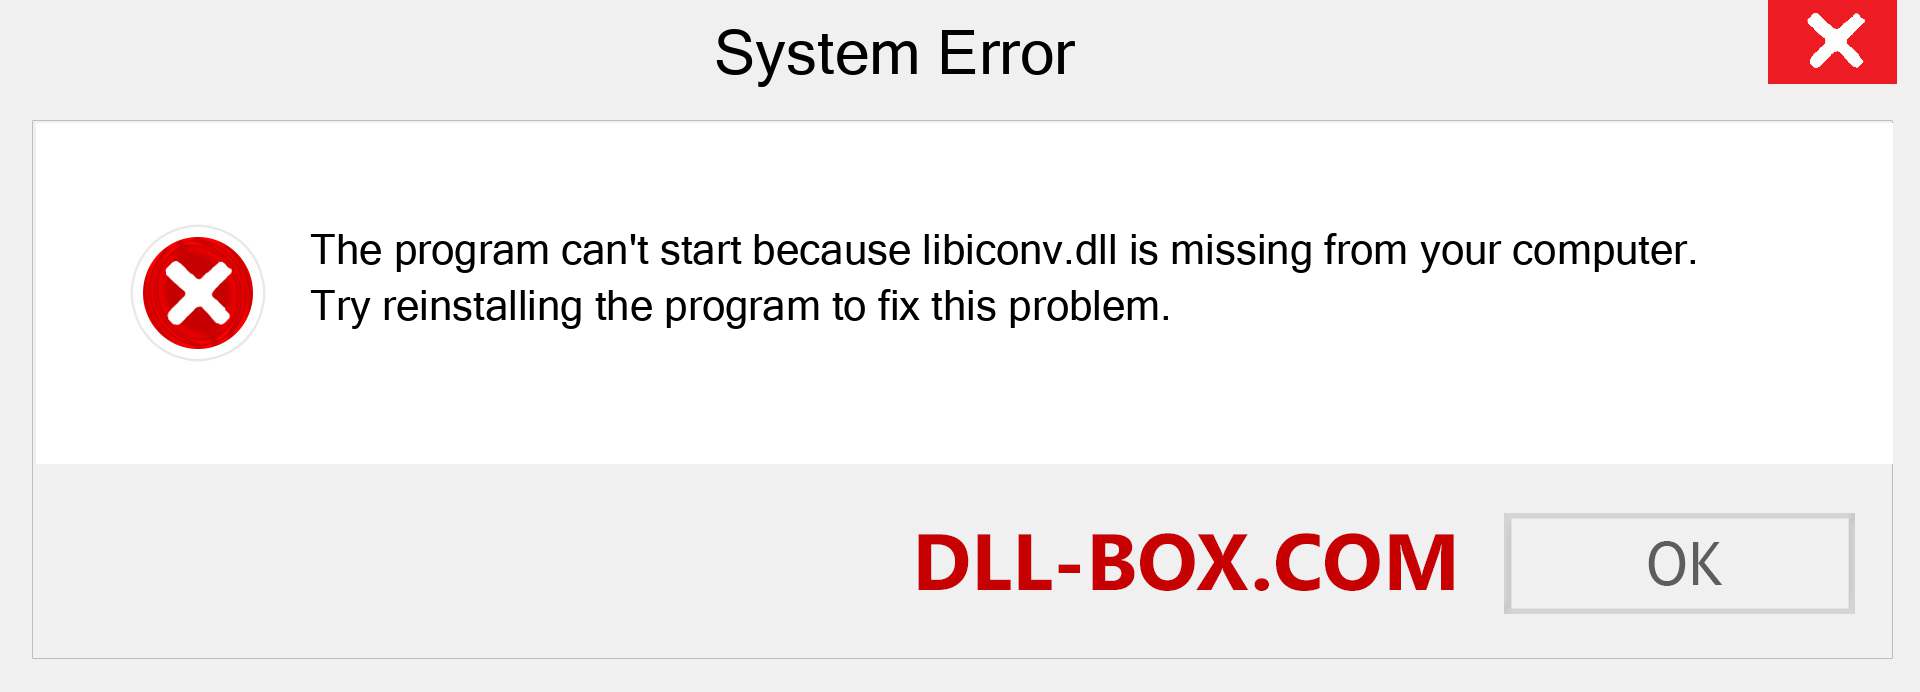  libiconv.dll file is missing?. Download for Windows 7, 8, 10 - Fix  libiconv dll Missing Error on Windows, photos, images